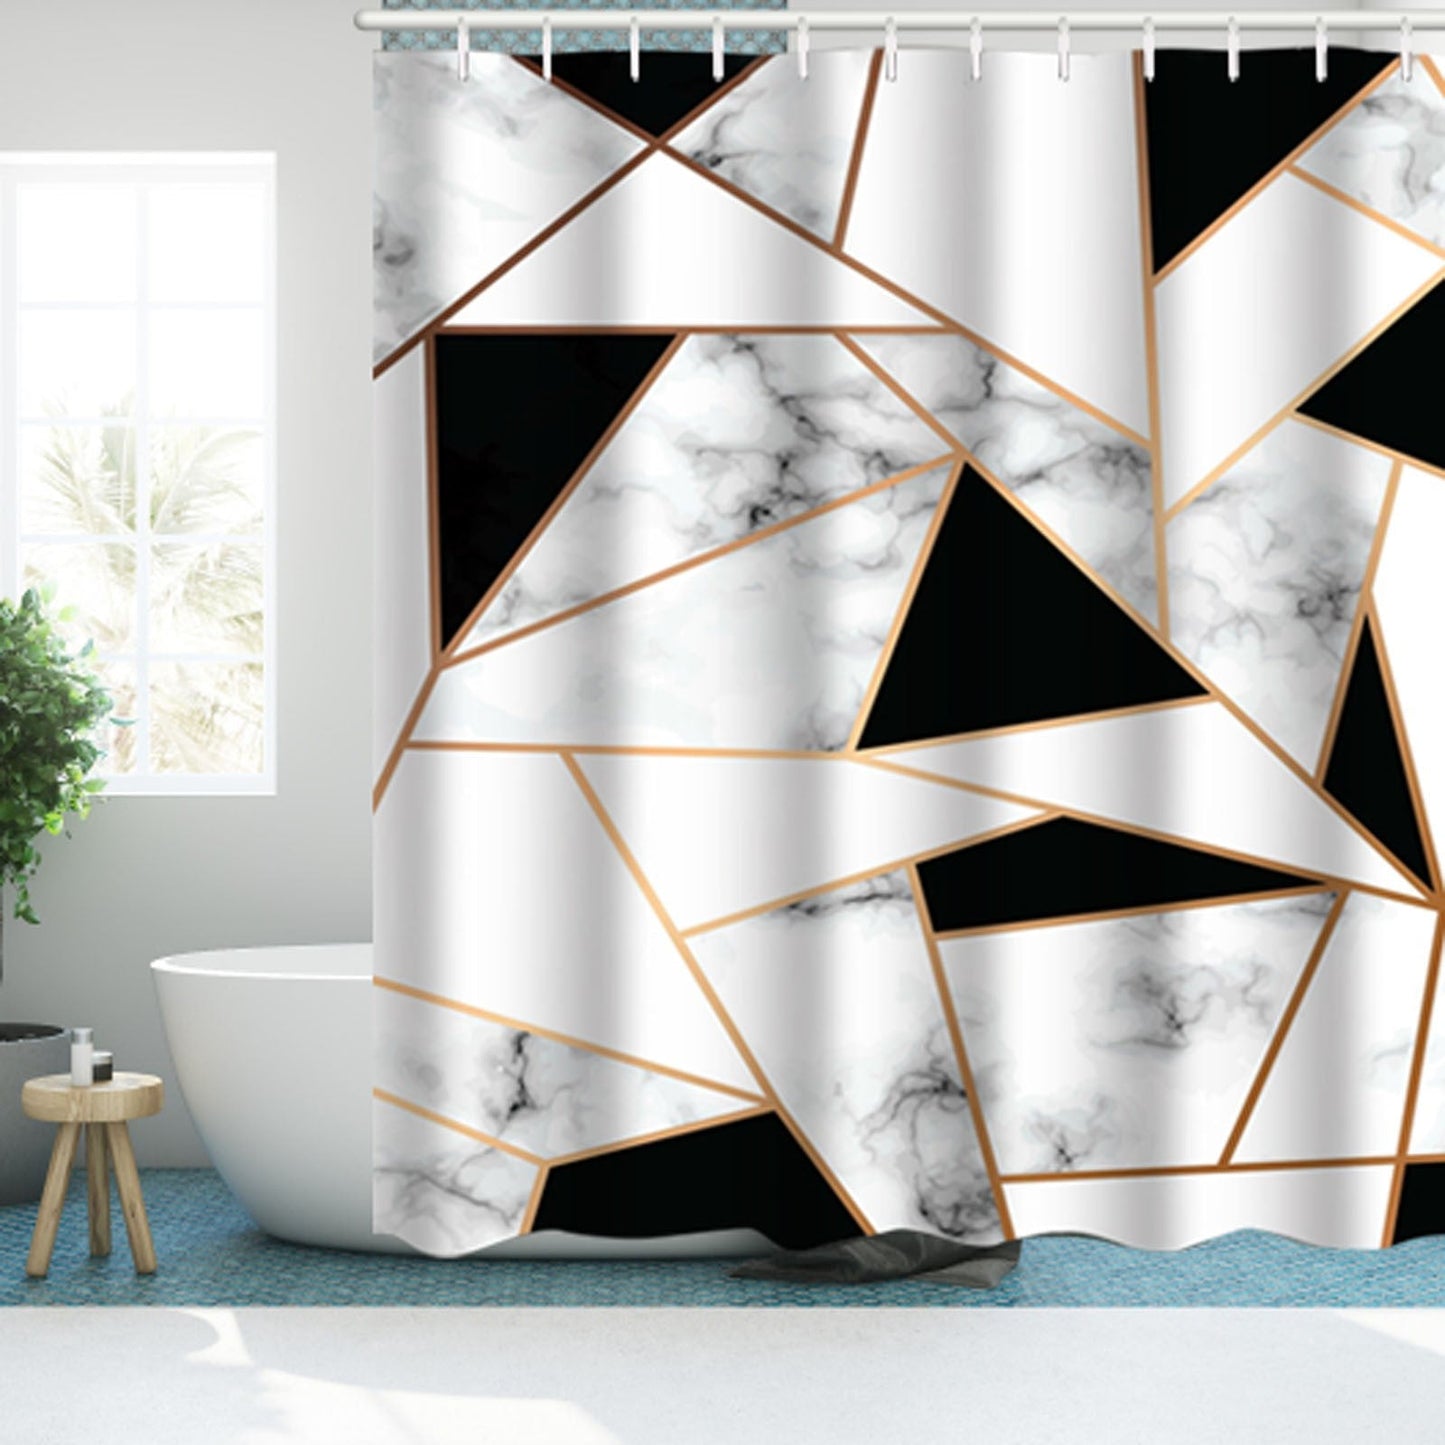 70x70 Inch Black and White Textured Marble Deluxe Fabric Shower Curtain Set | Decor Gifts and More